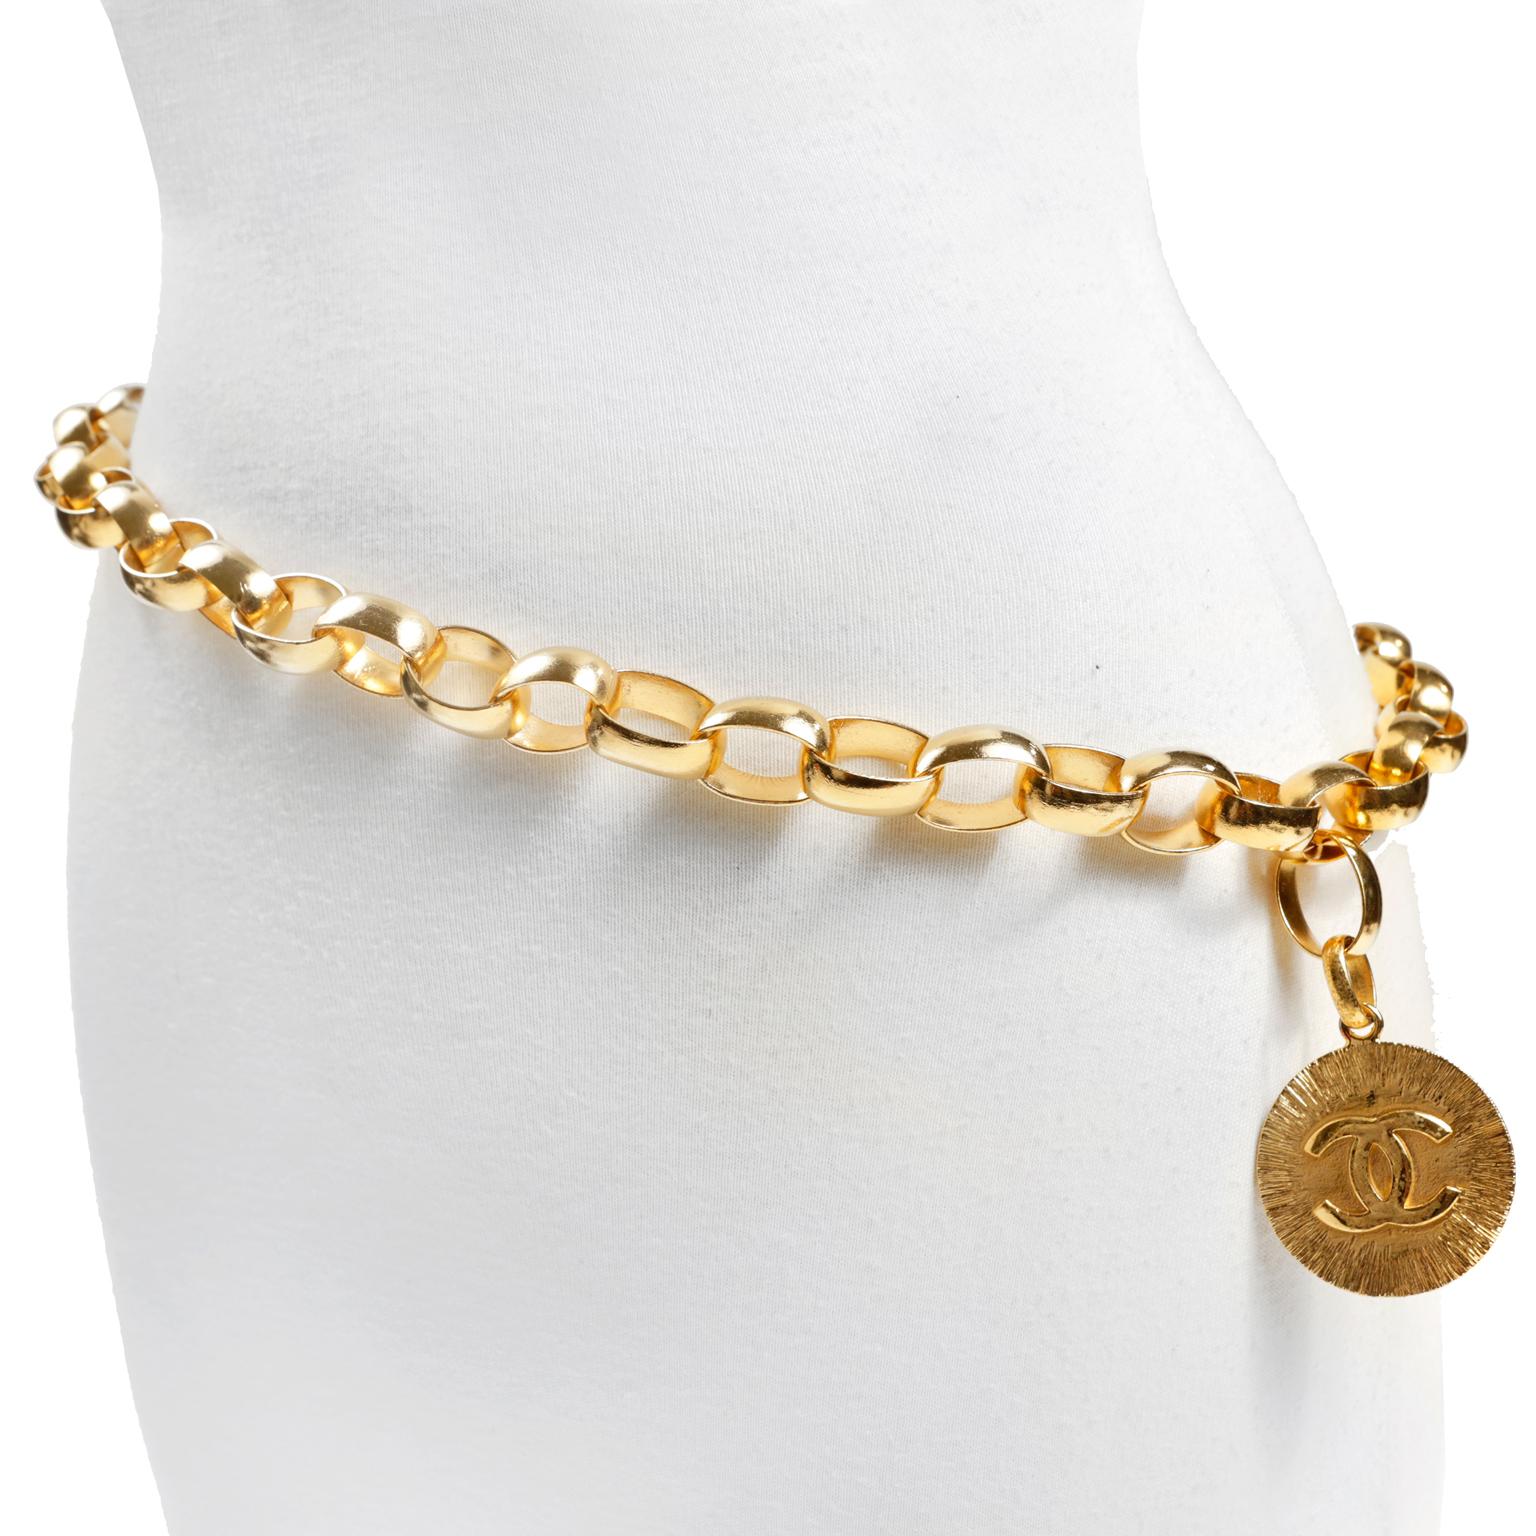 Chanel Gold CC Chain Belt Necklace- Excellent Condition
Worn as a belt or a necklace, this piece is a versatile addition to any wardrobe.
Substantial gold tone linked chain has adjustable hook closure.  Interlocking CC disc medallion dangles from a